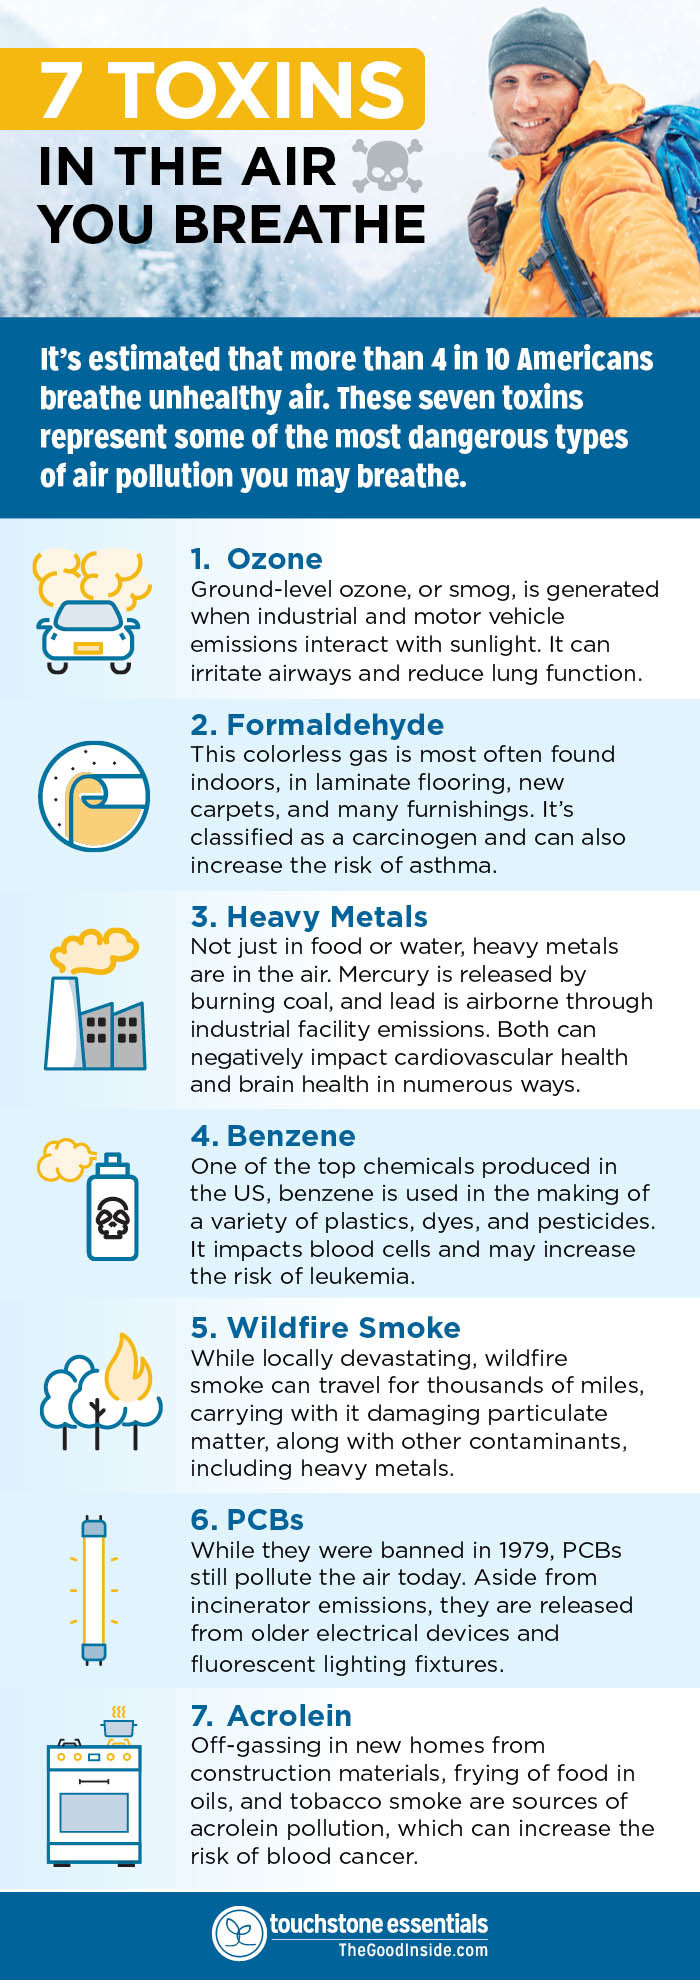 7 Toxins in the Air You Breathe